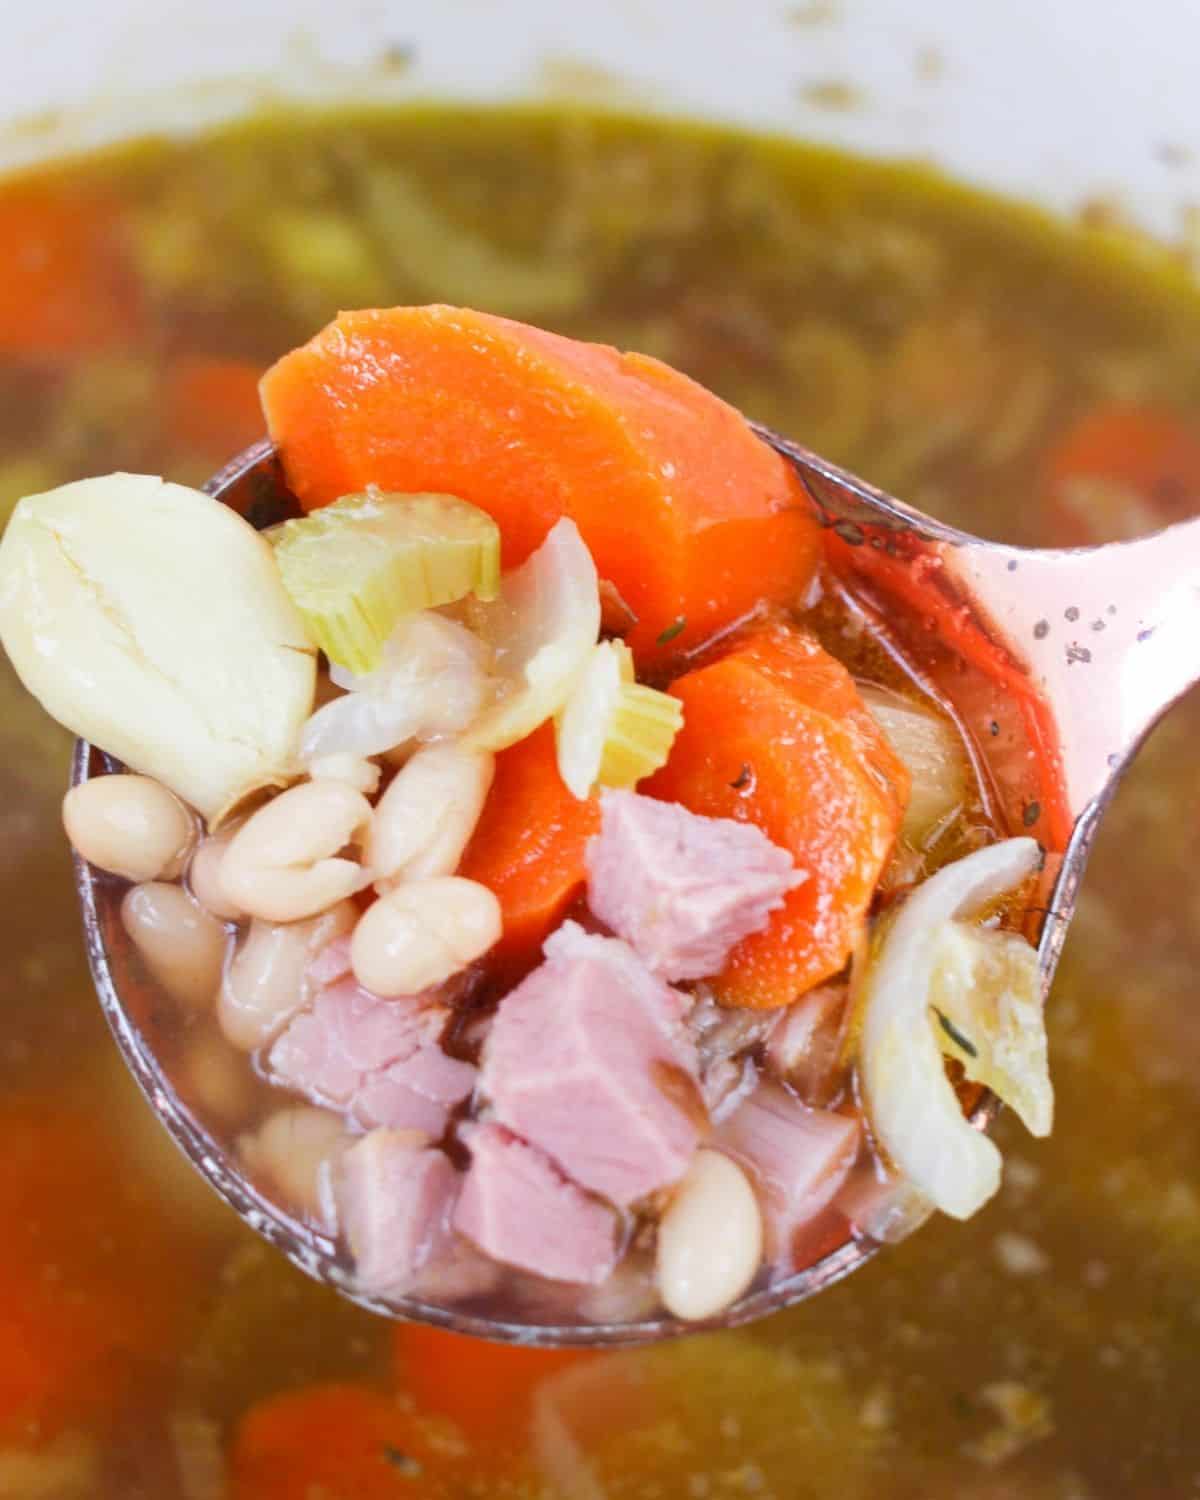 A ladle filled with diced ham, carrots, celery, and onions.